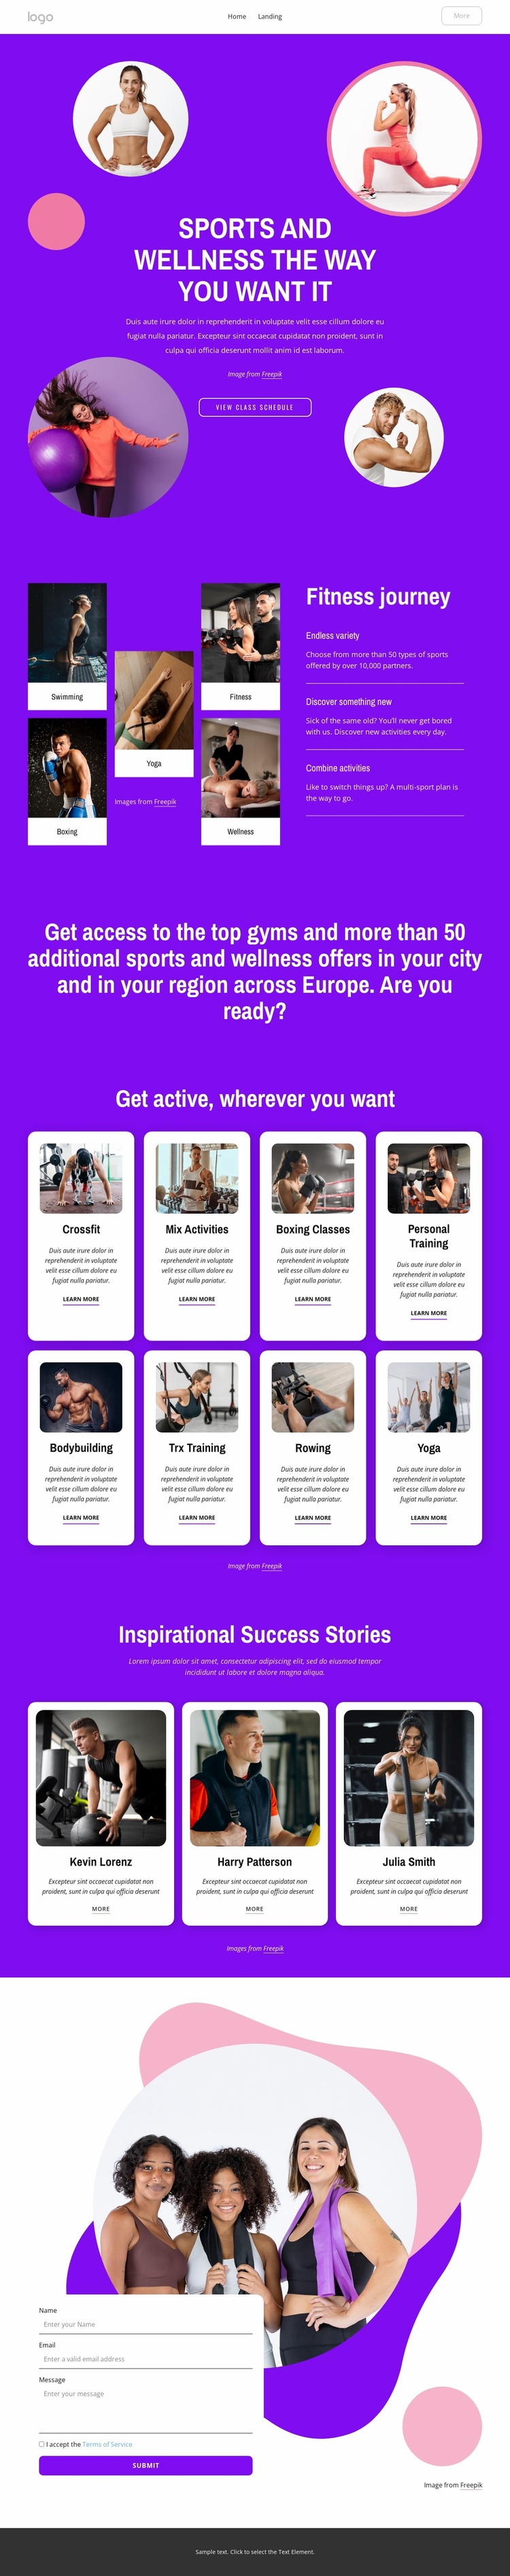 Sports and wellness the way you want it eCommerce Website Design